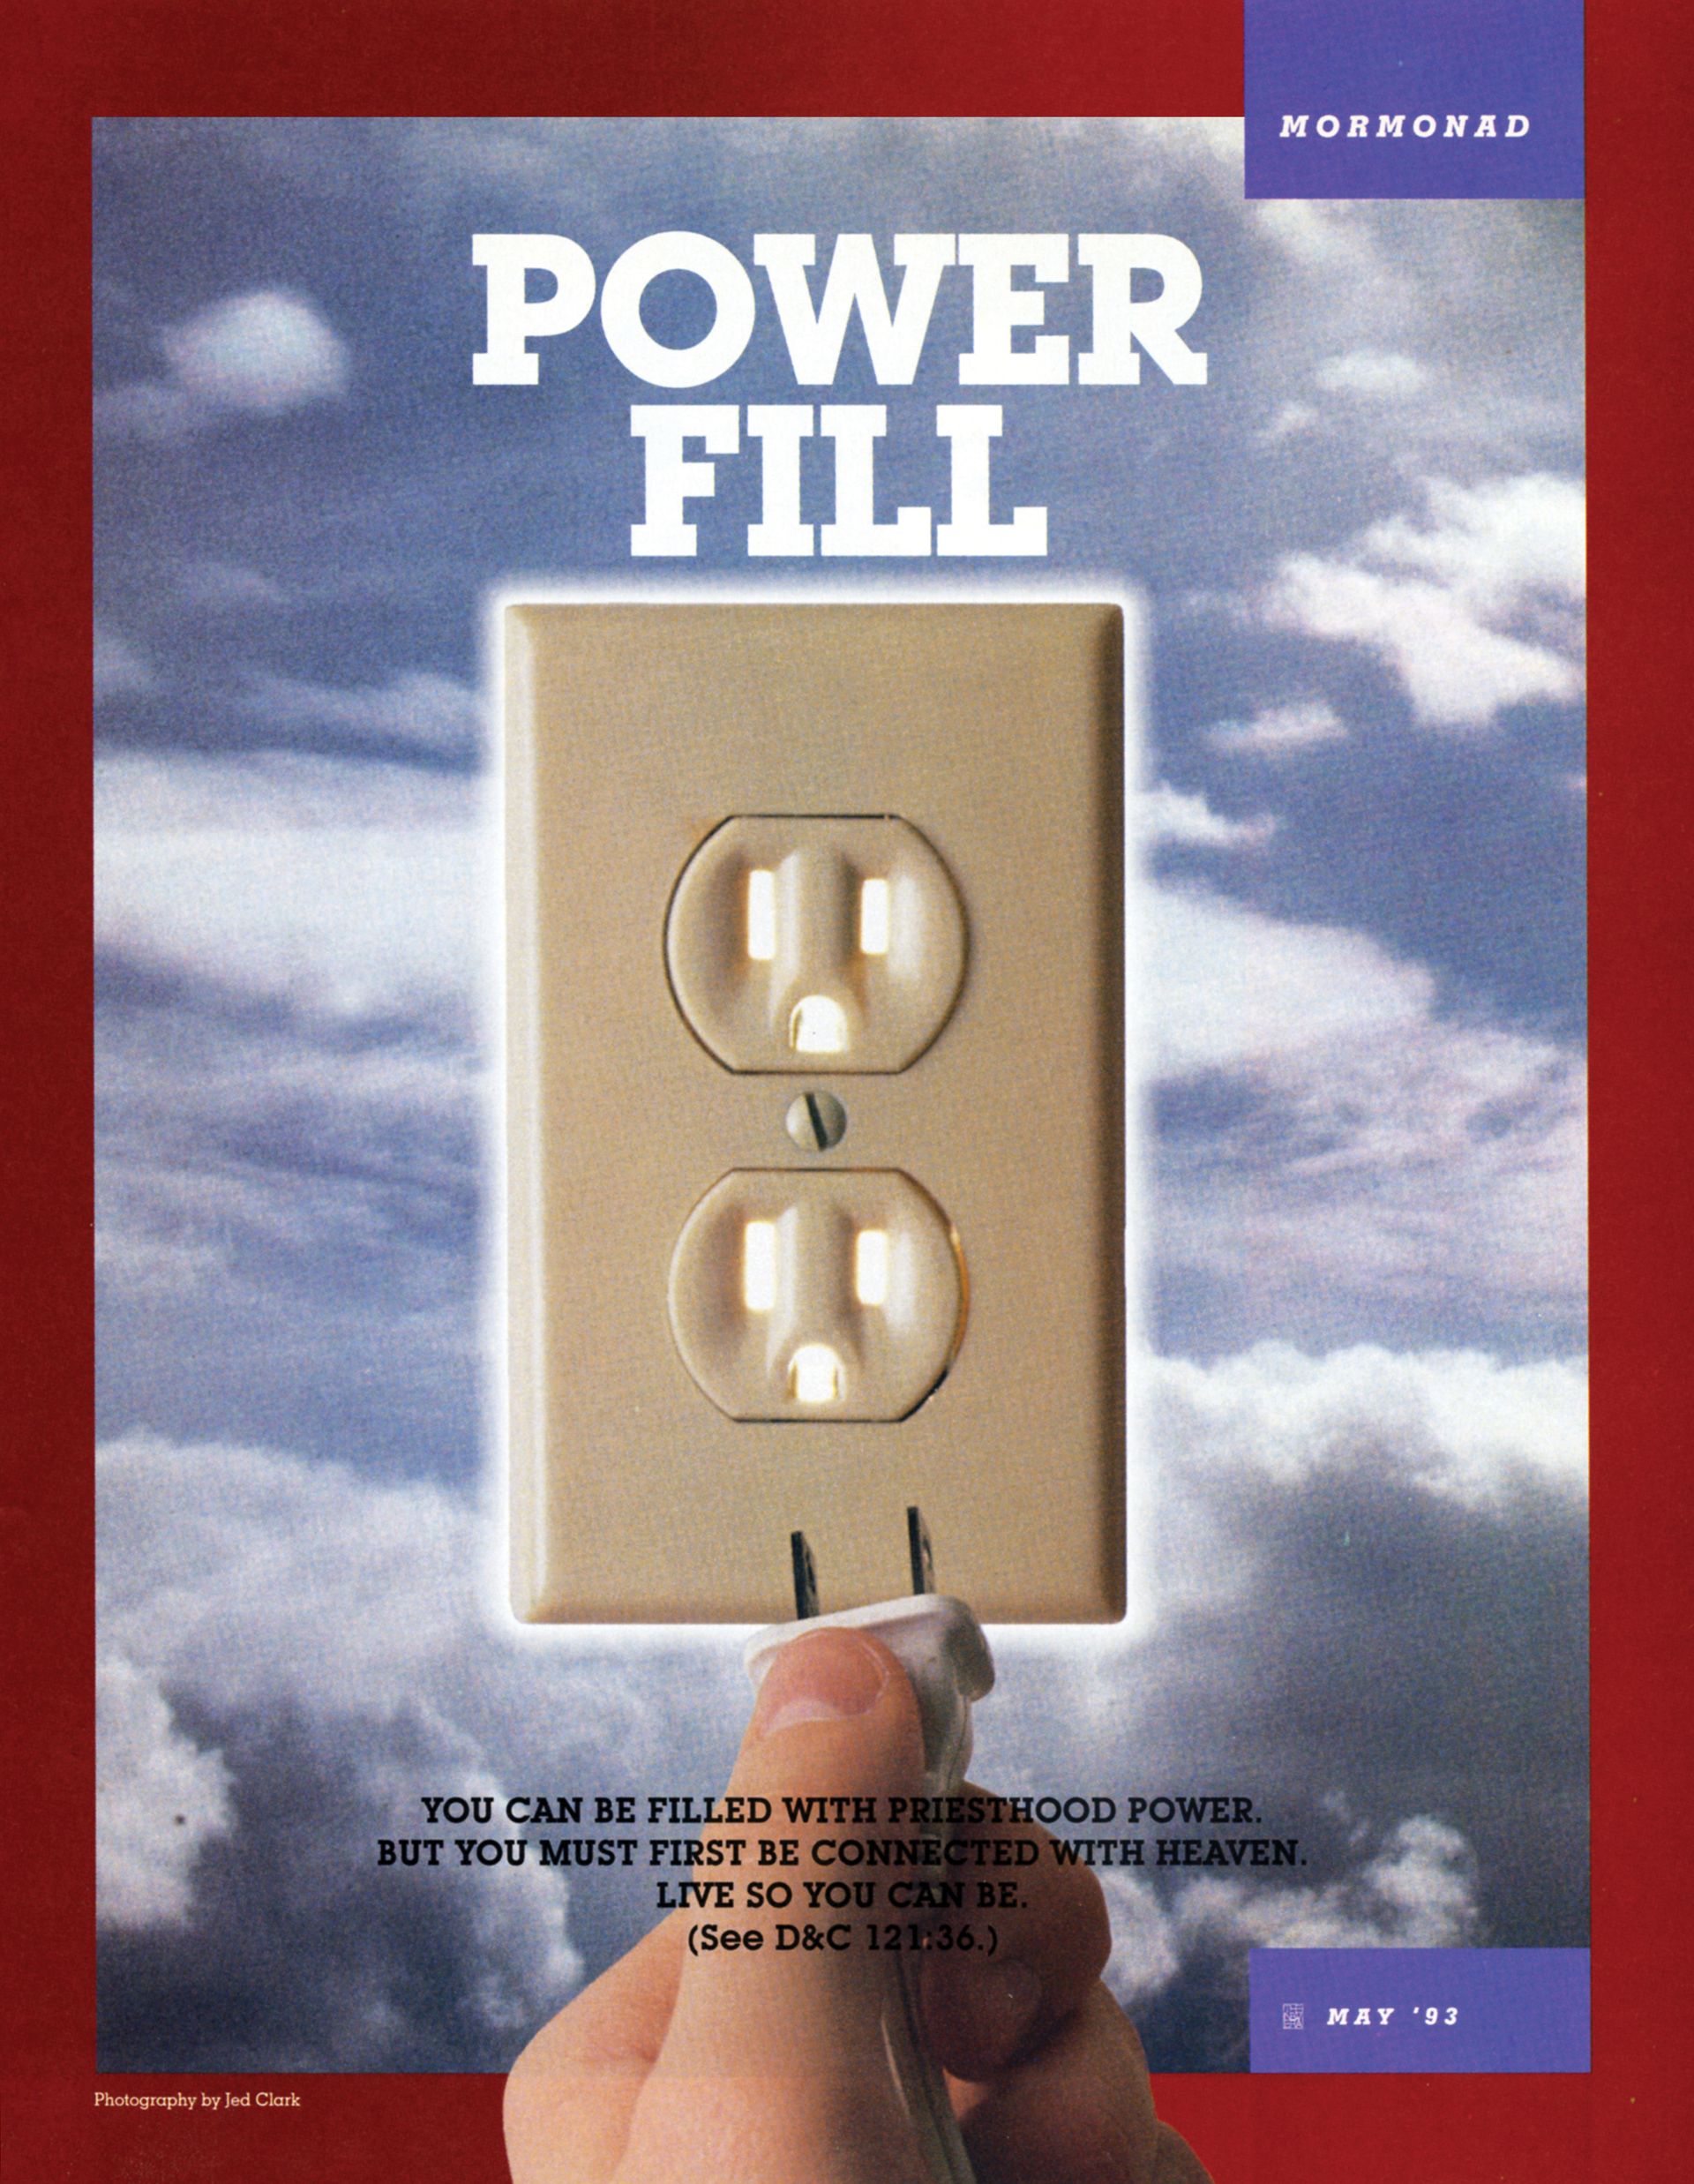 Power Fill. You can be filled with priesthood power, but you must first be connected with heaven. Live so you can be. (See D&C 121: 36.) May 1993 © undefined ipCode 1.